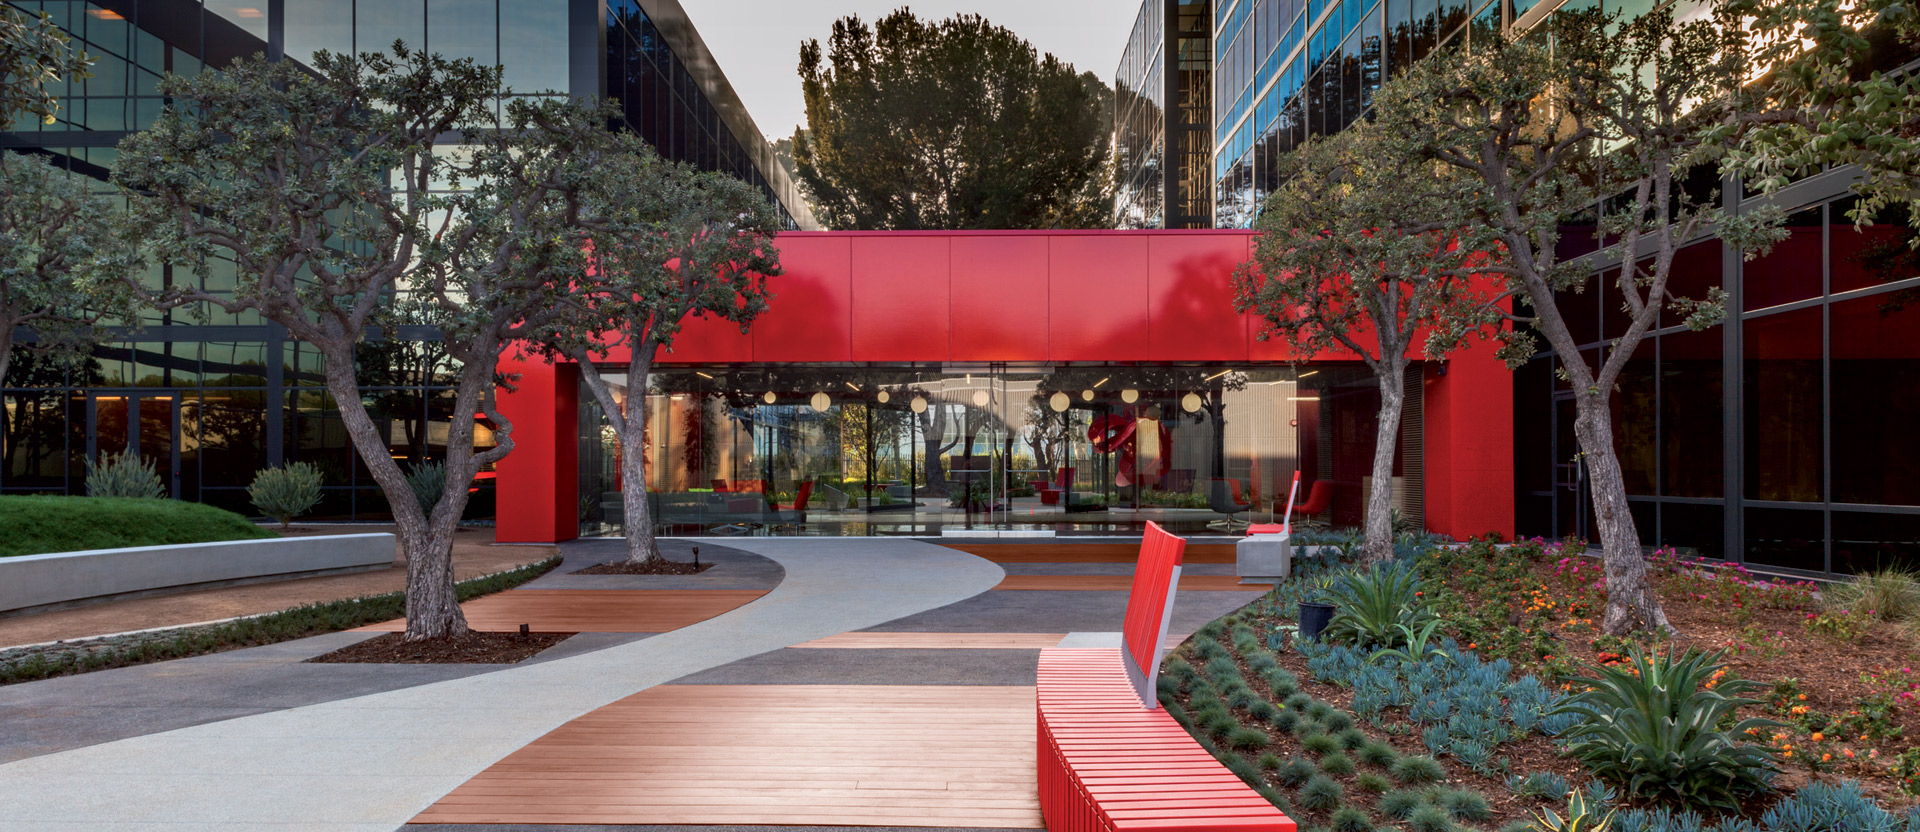 Landscape architecture integrates with modern corporate building design featuring a vibrant red awning, matching linear benches, and a meandering pathway amidst drought-tolerant plantings.